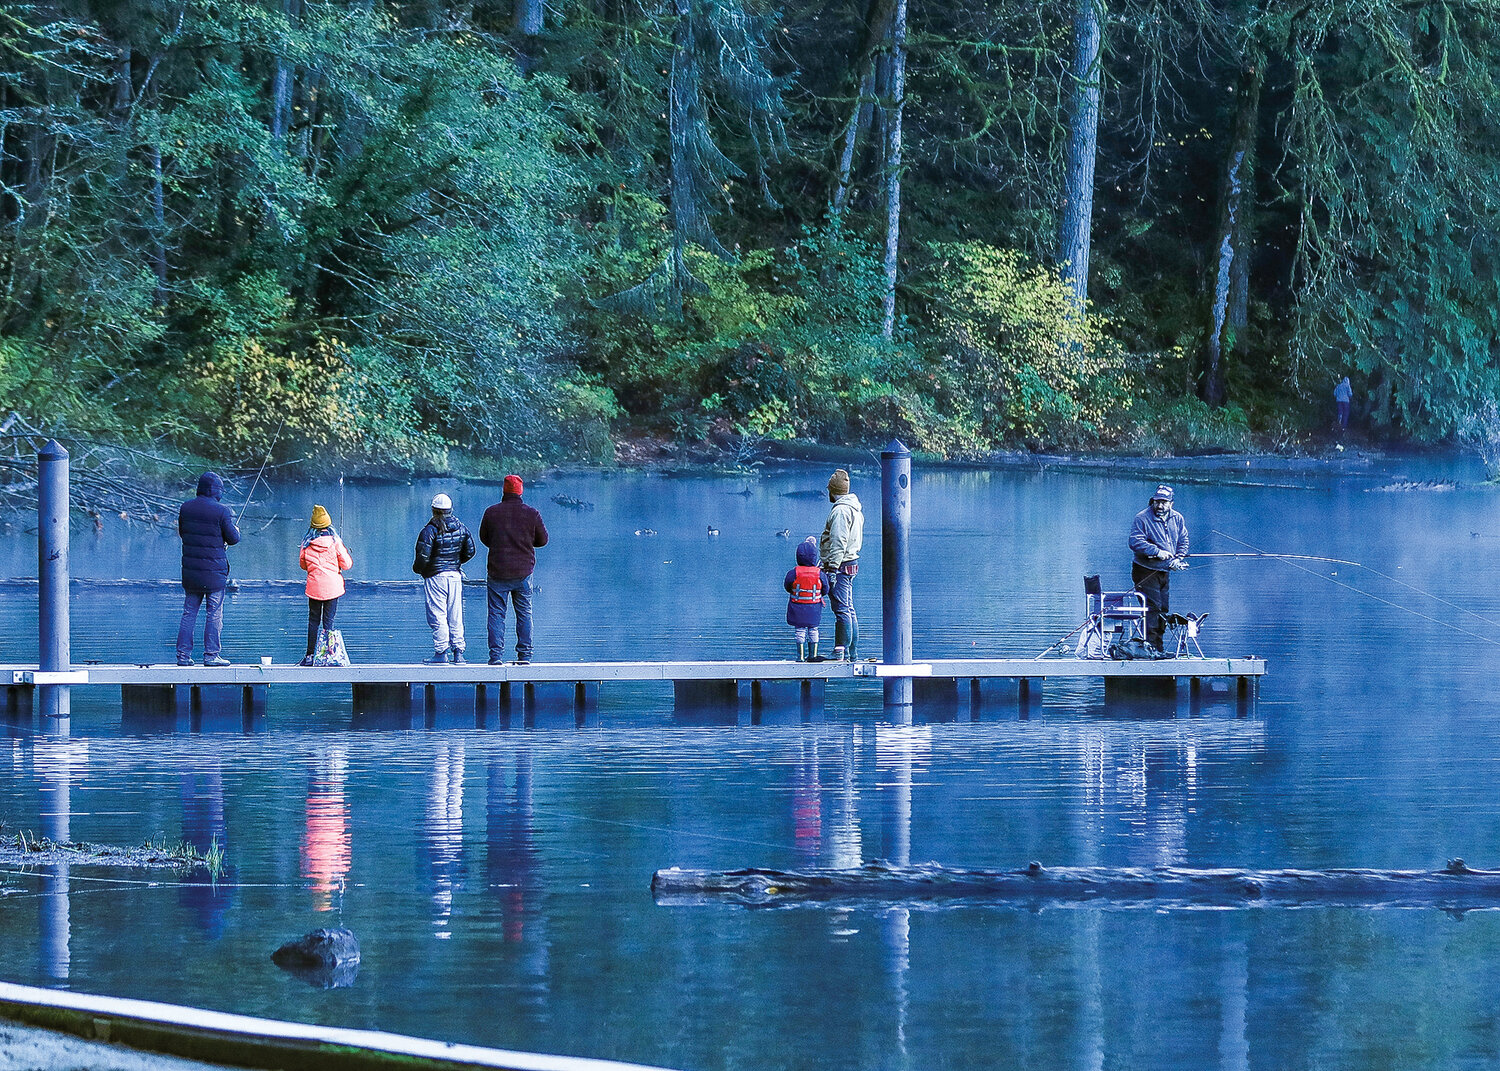 The docks were full of anglers at Battle Ground Lake during the morning of Friday, Nov. 24.